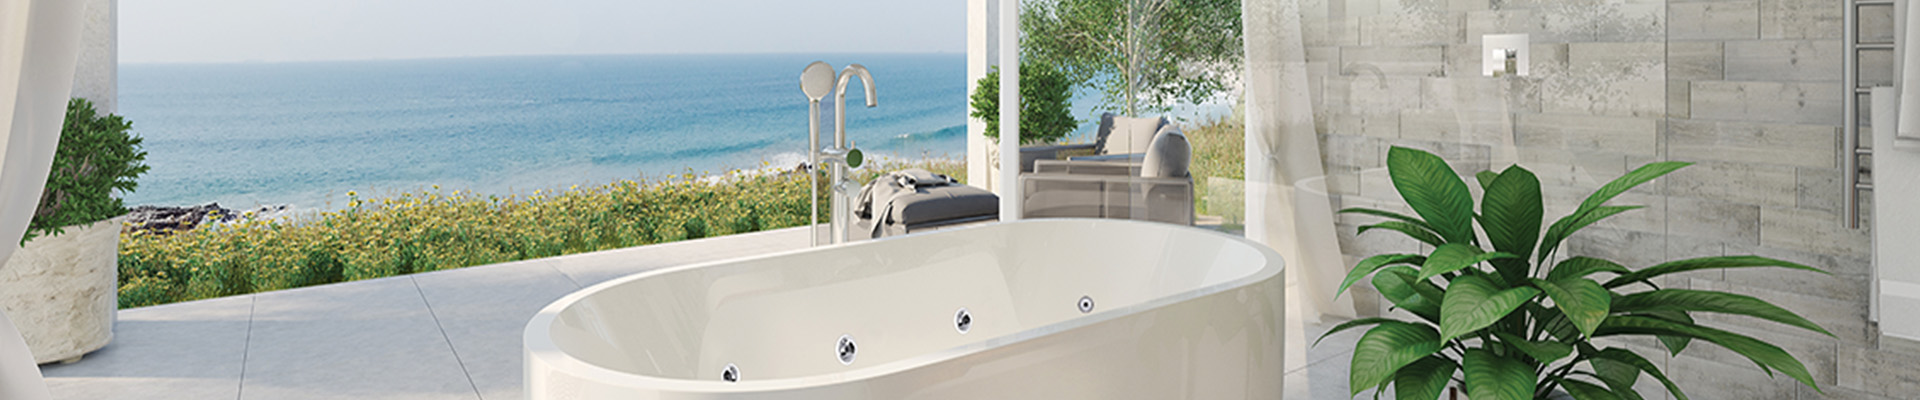 Freestanding Spa Bath with chrome floor mounted bath filler and an ocean view and shower in the background